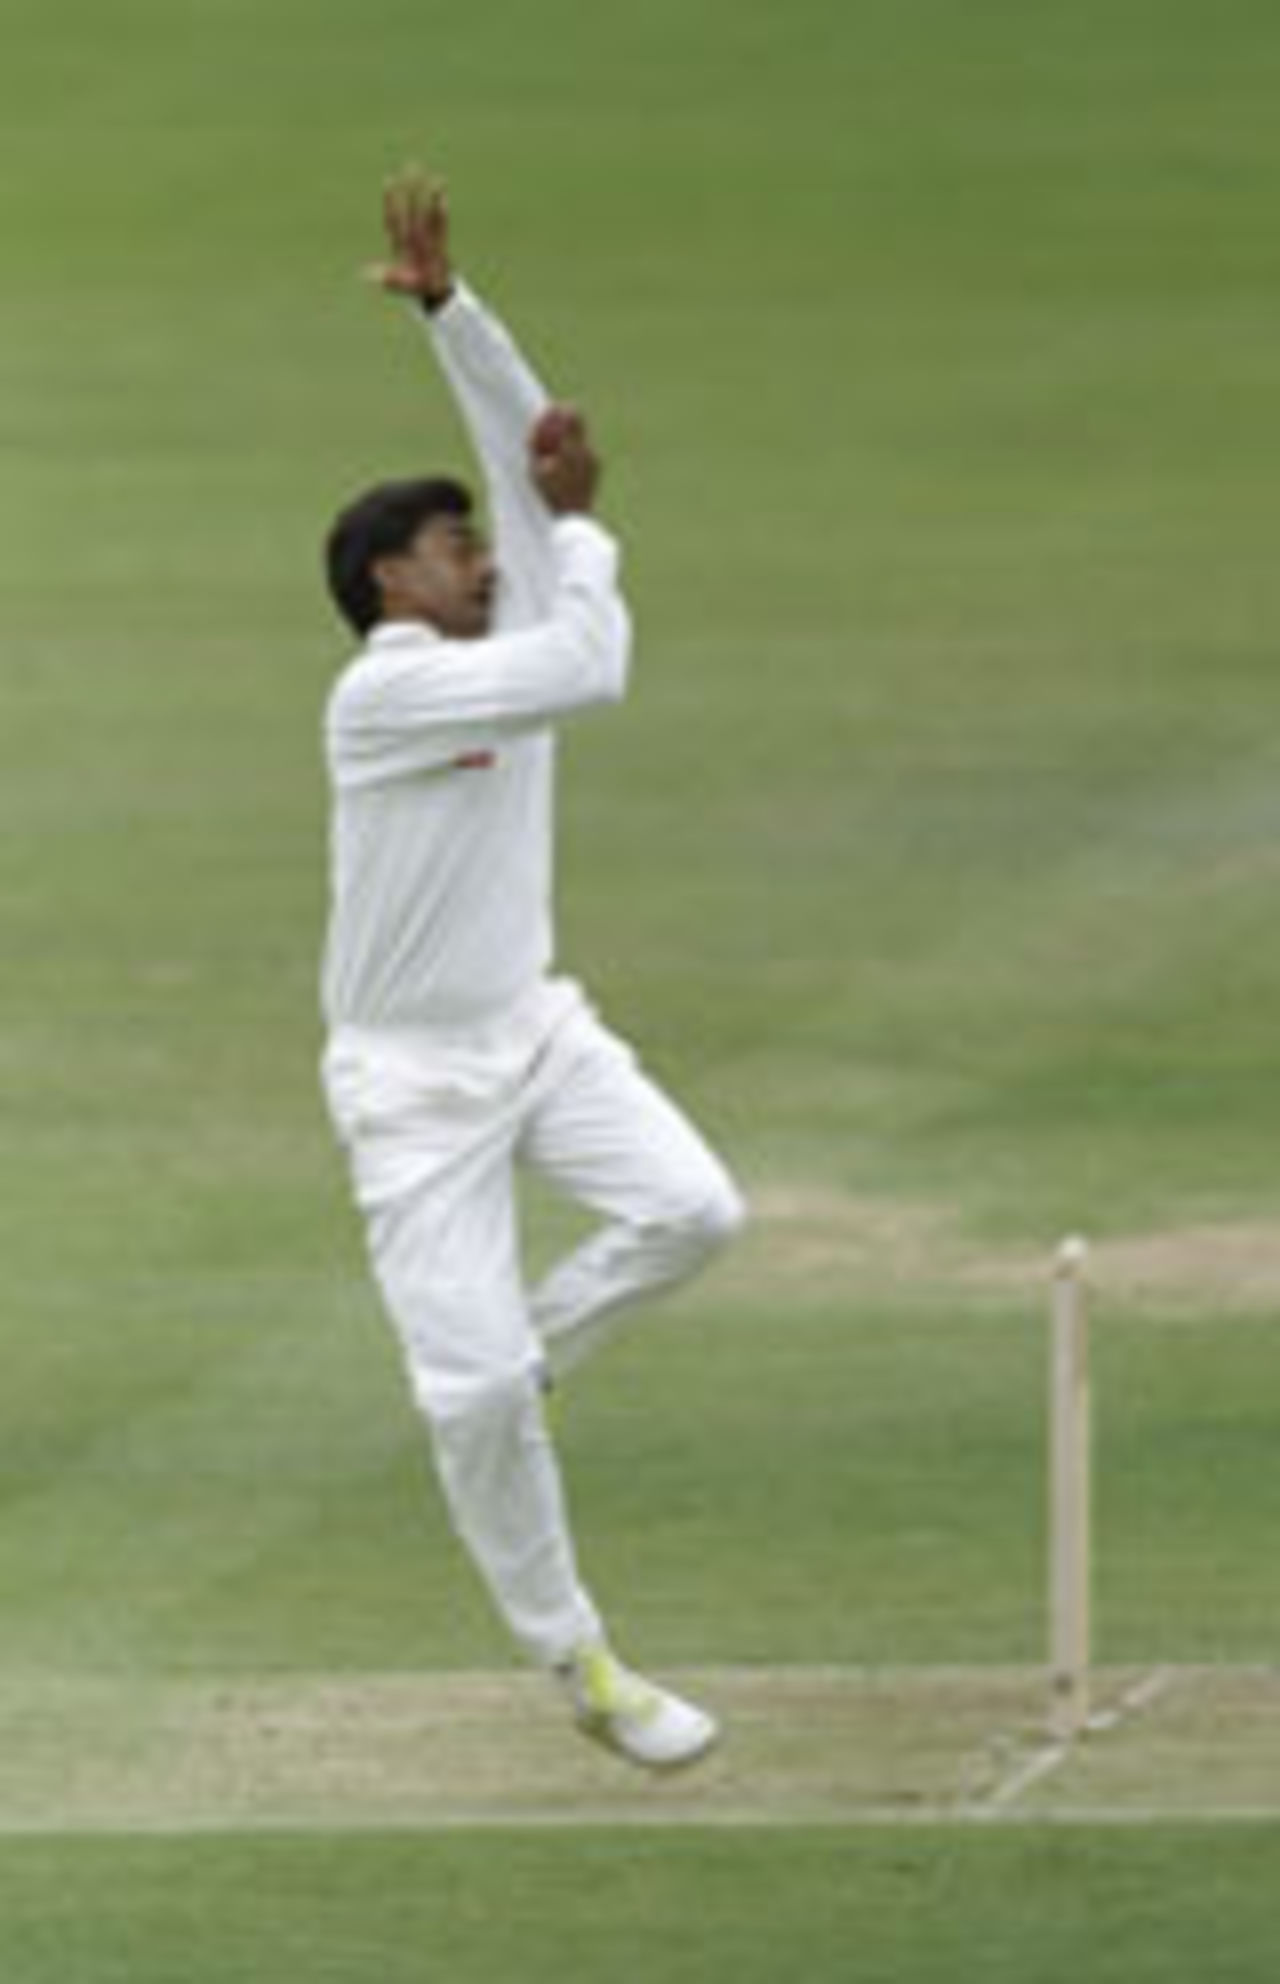 Javagal Srinath bowling during the second test between England v India, Lords, June 20, 1996